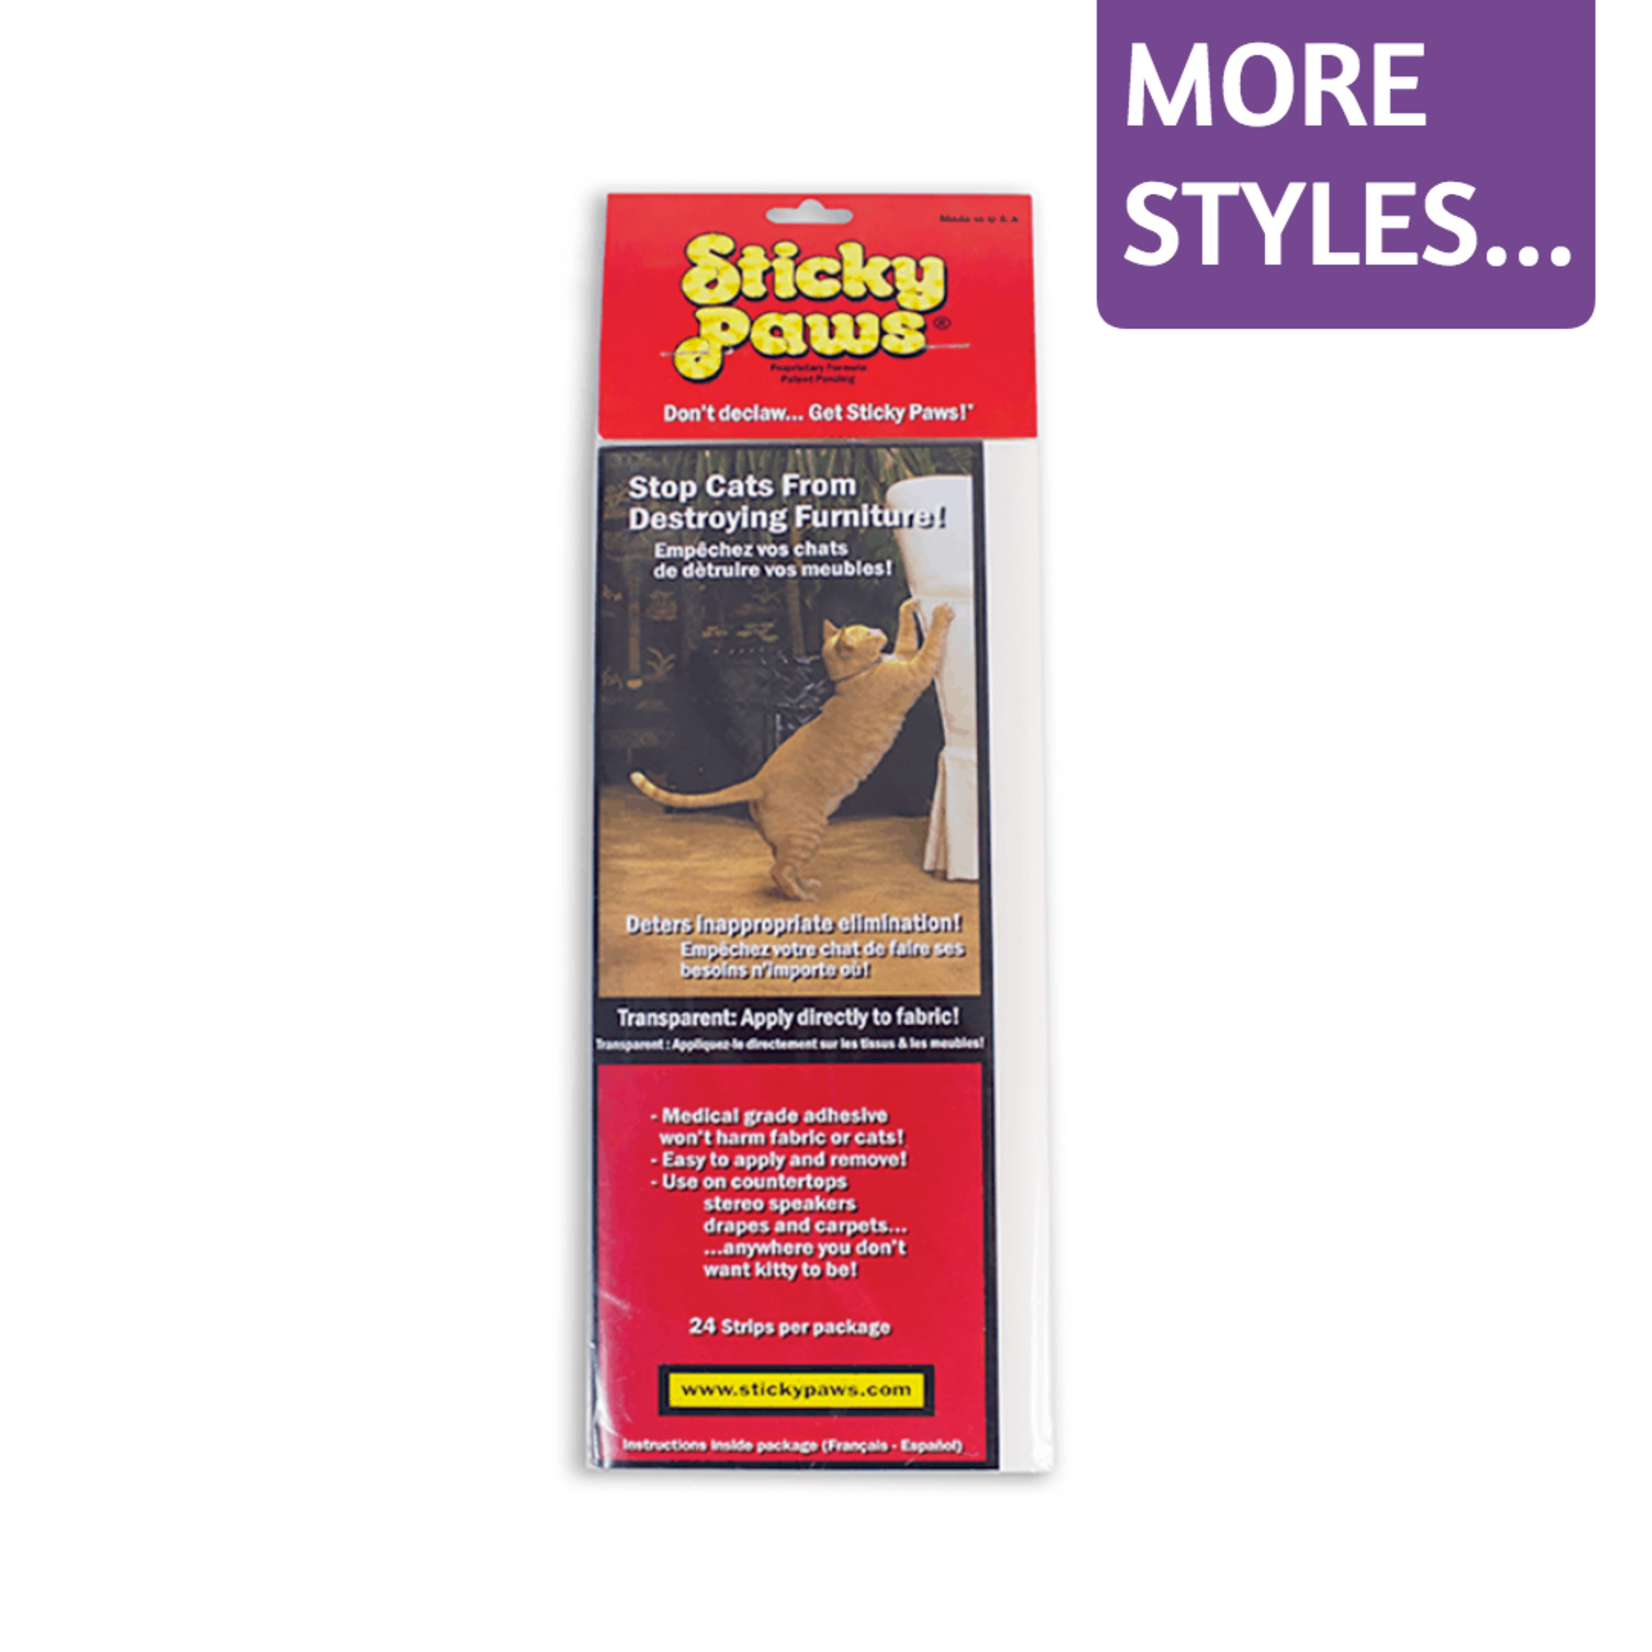 Pioneer Pet Products / Smart Cat Pioneer Pet Sticky Paws No Scratch Sticky Furniture Strips